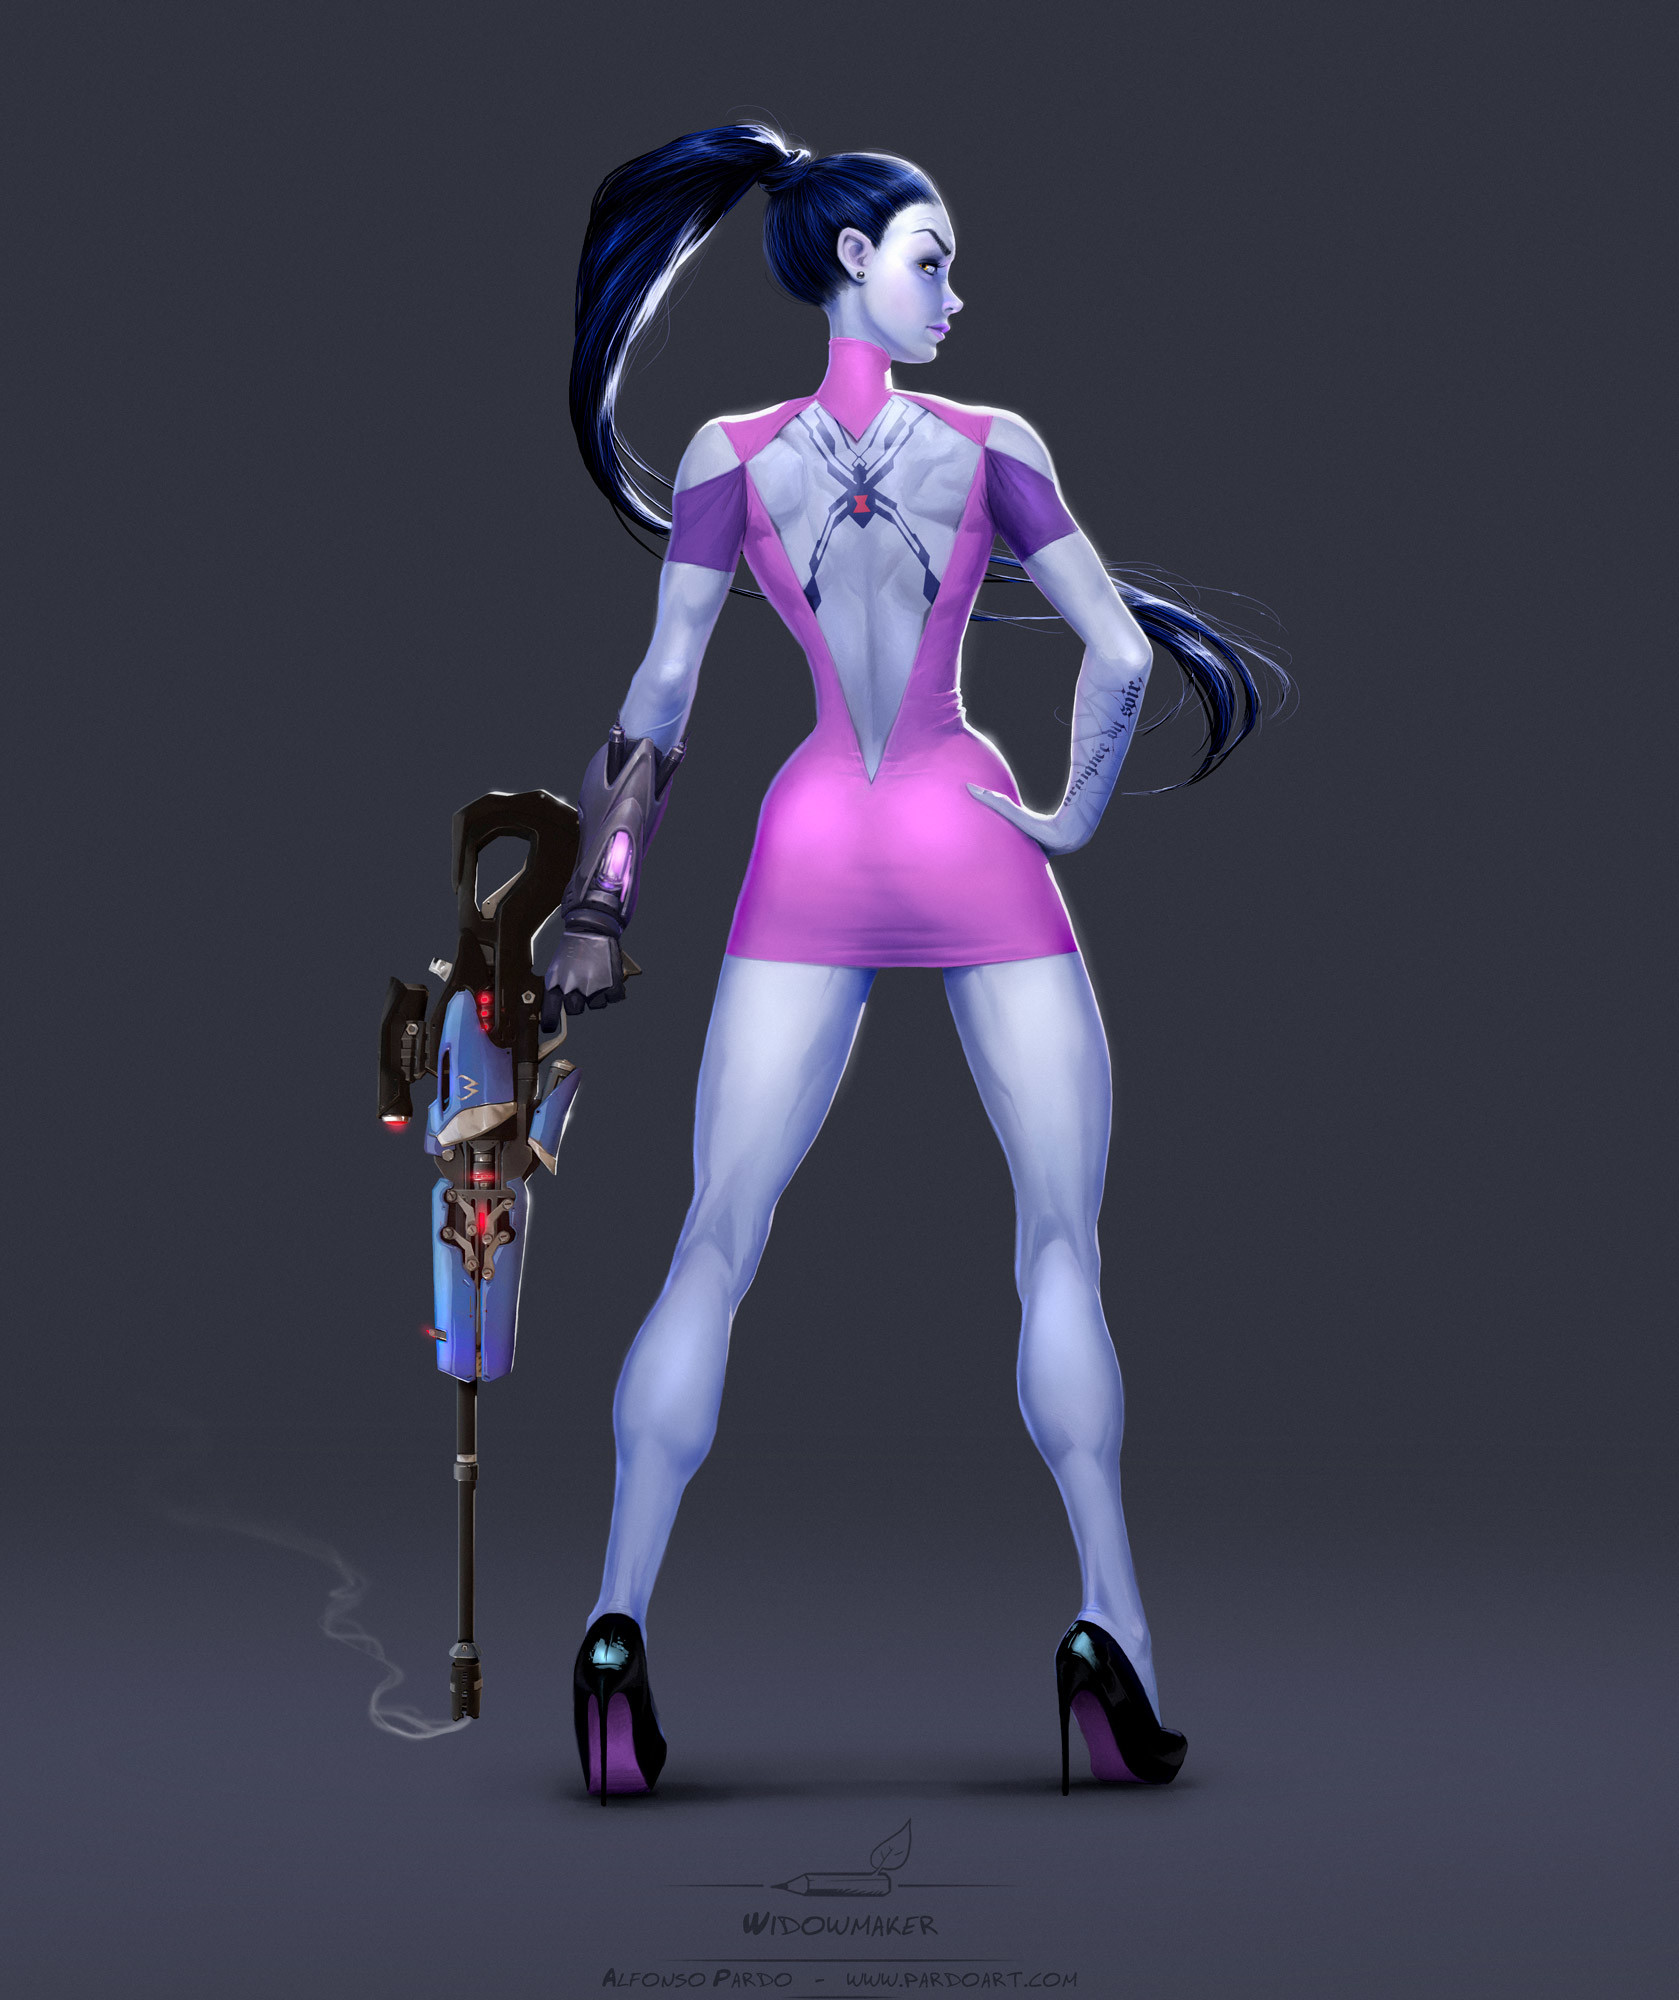 Here is a fanart of one of my favourite characters, Widowmaker. 